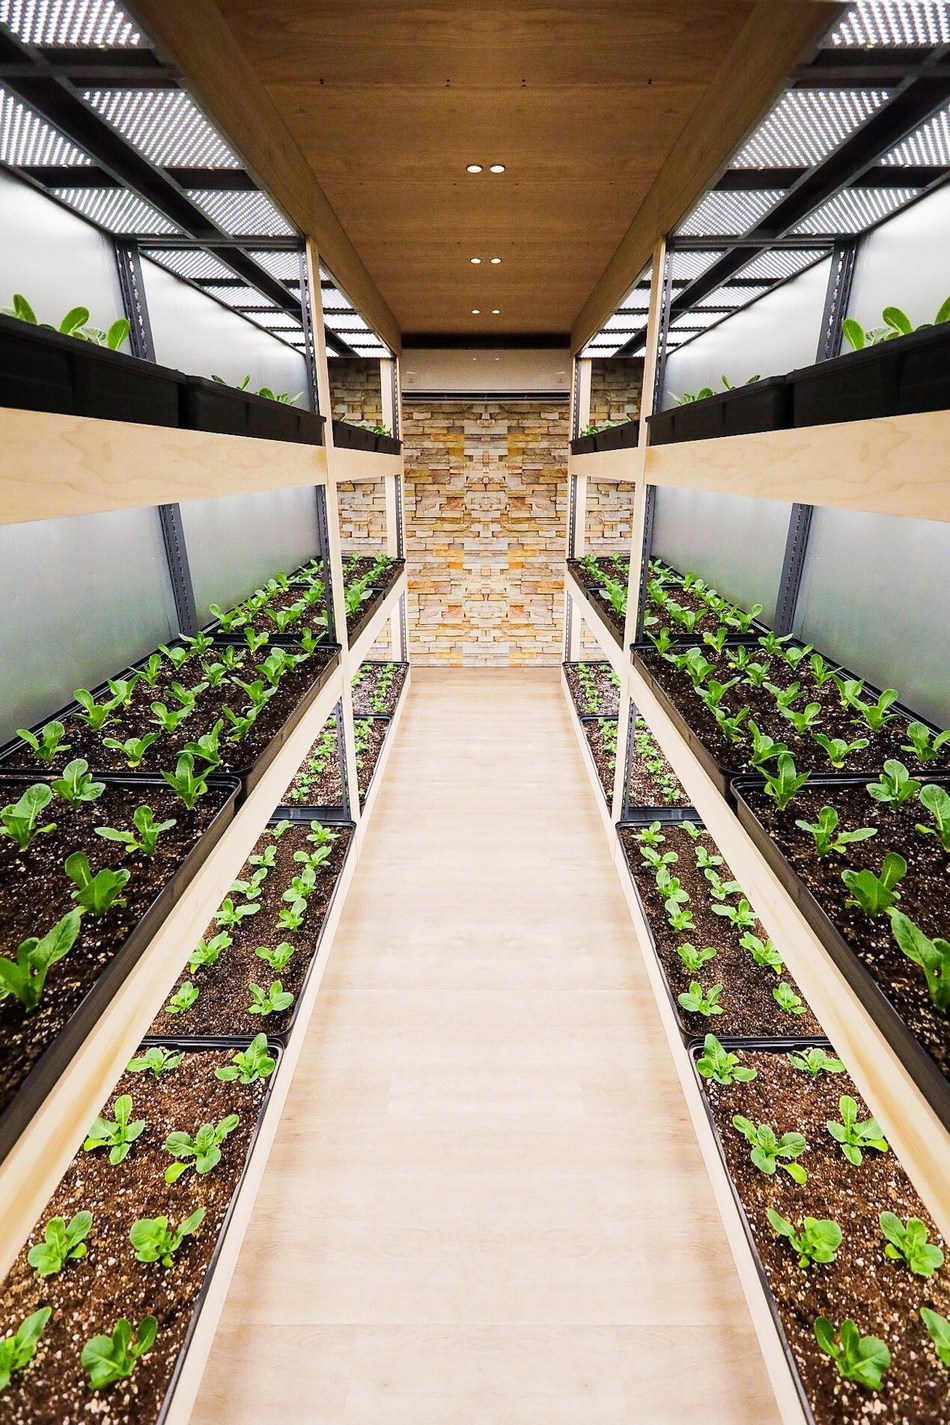 GrowPod's new clean, modular and scalable indoor farms are capable of producing the world's finest, luxury Super Foods.